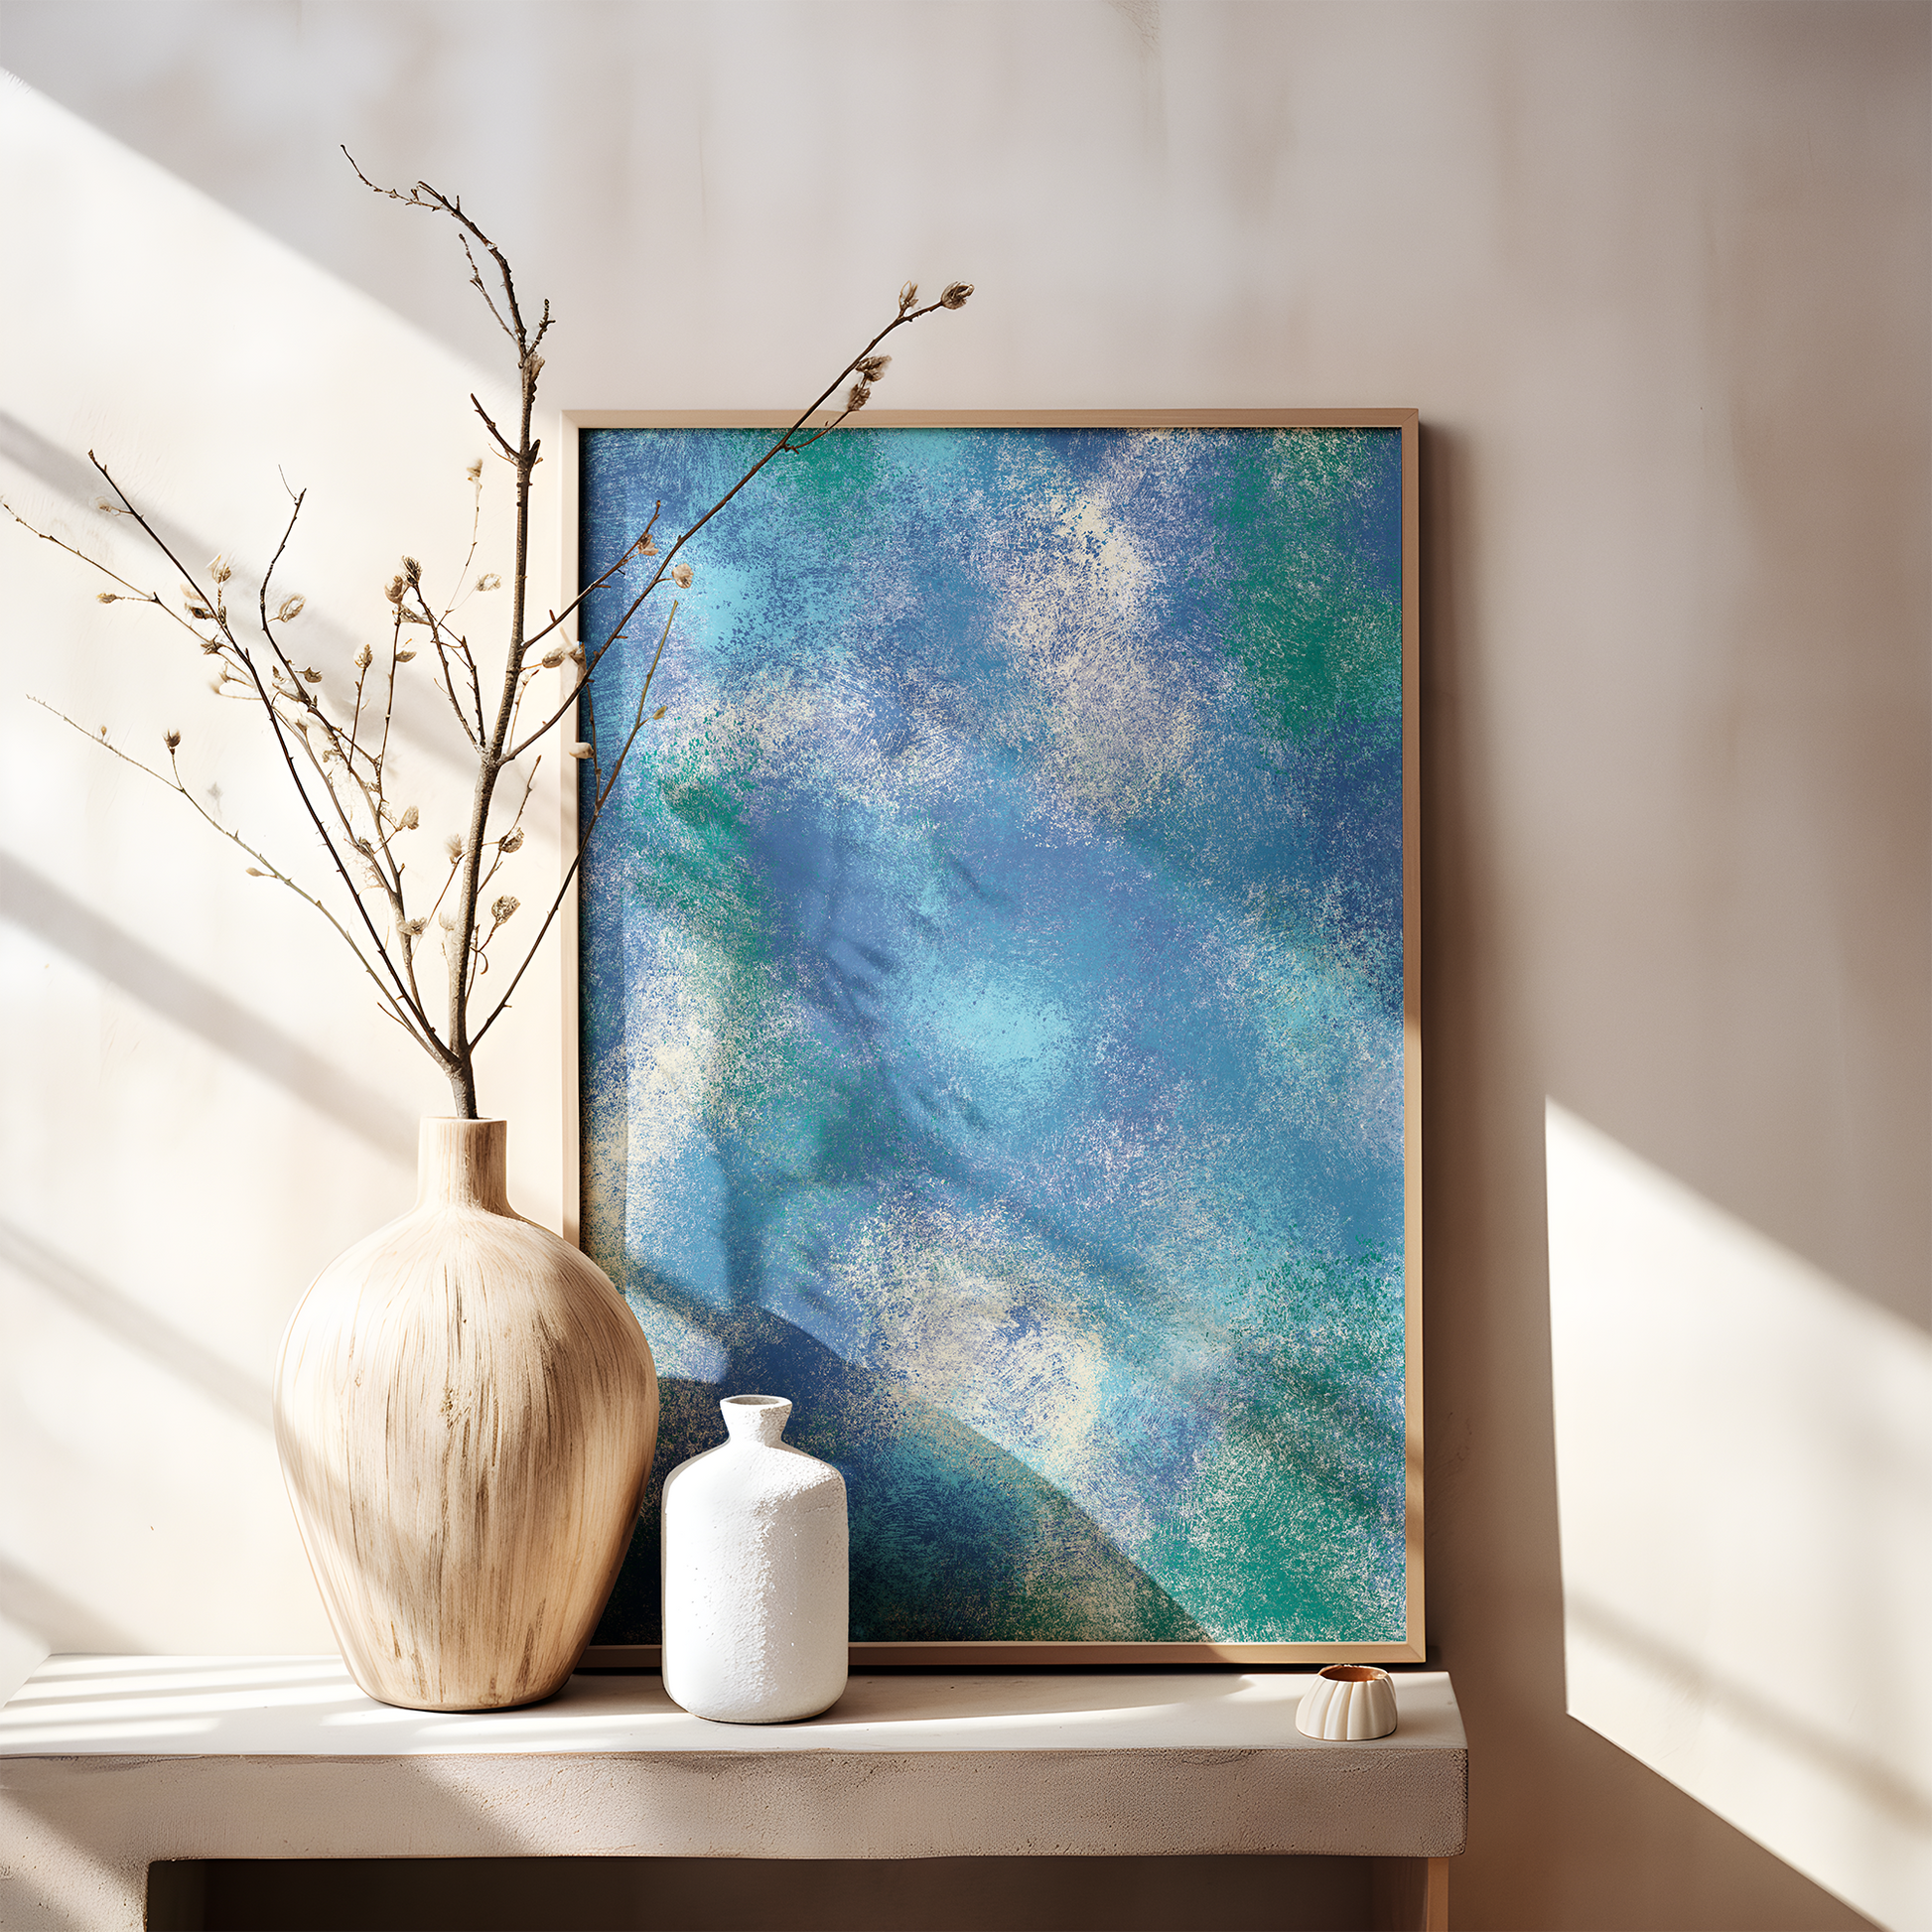 Free Printable digital painting with abstract blue and green texture, evoking an underwater dreamscape, showcased on a minimalist shelf beside a dried botanical arrangement.